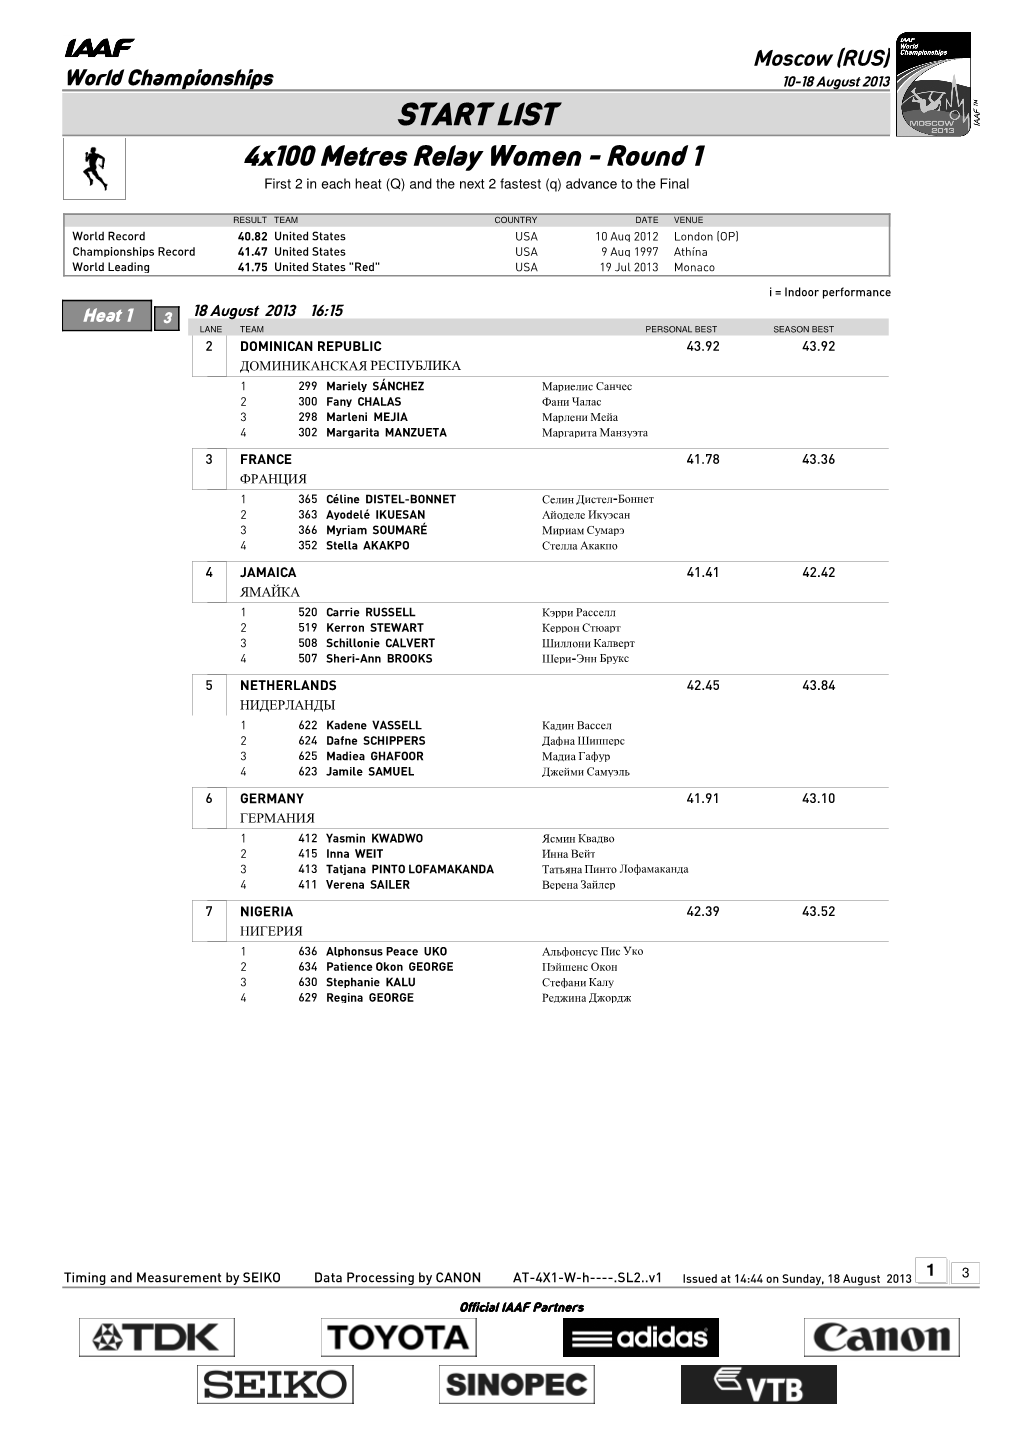 START LIST 4X100 Metres Relay Women - Round 1 First 2 in Each Heat (Q) and the Next 2 Fastest (Q) Advance to the Final